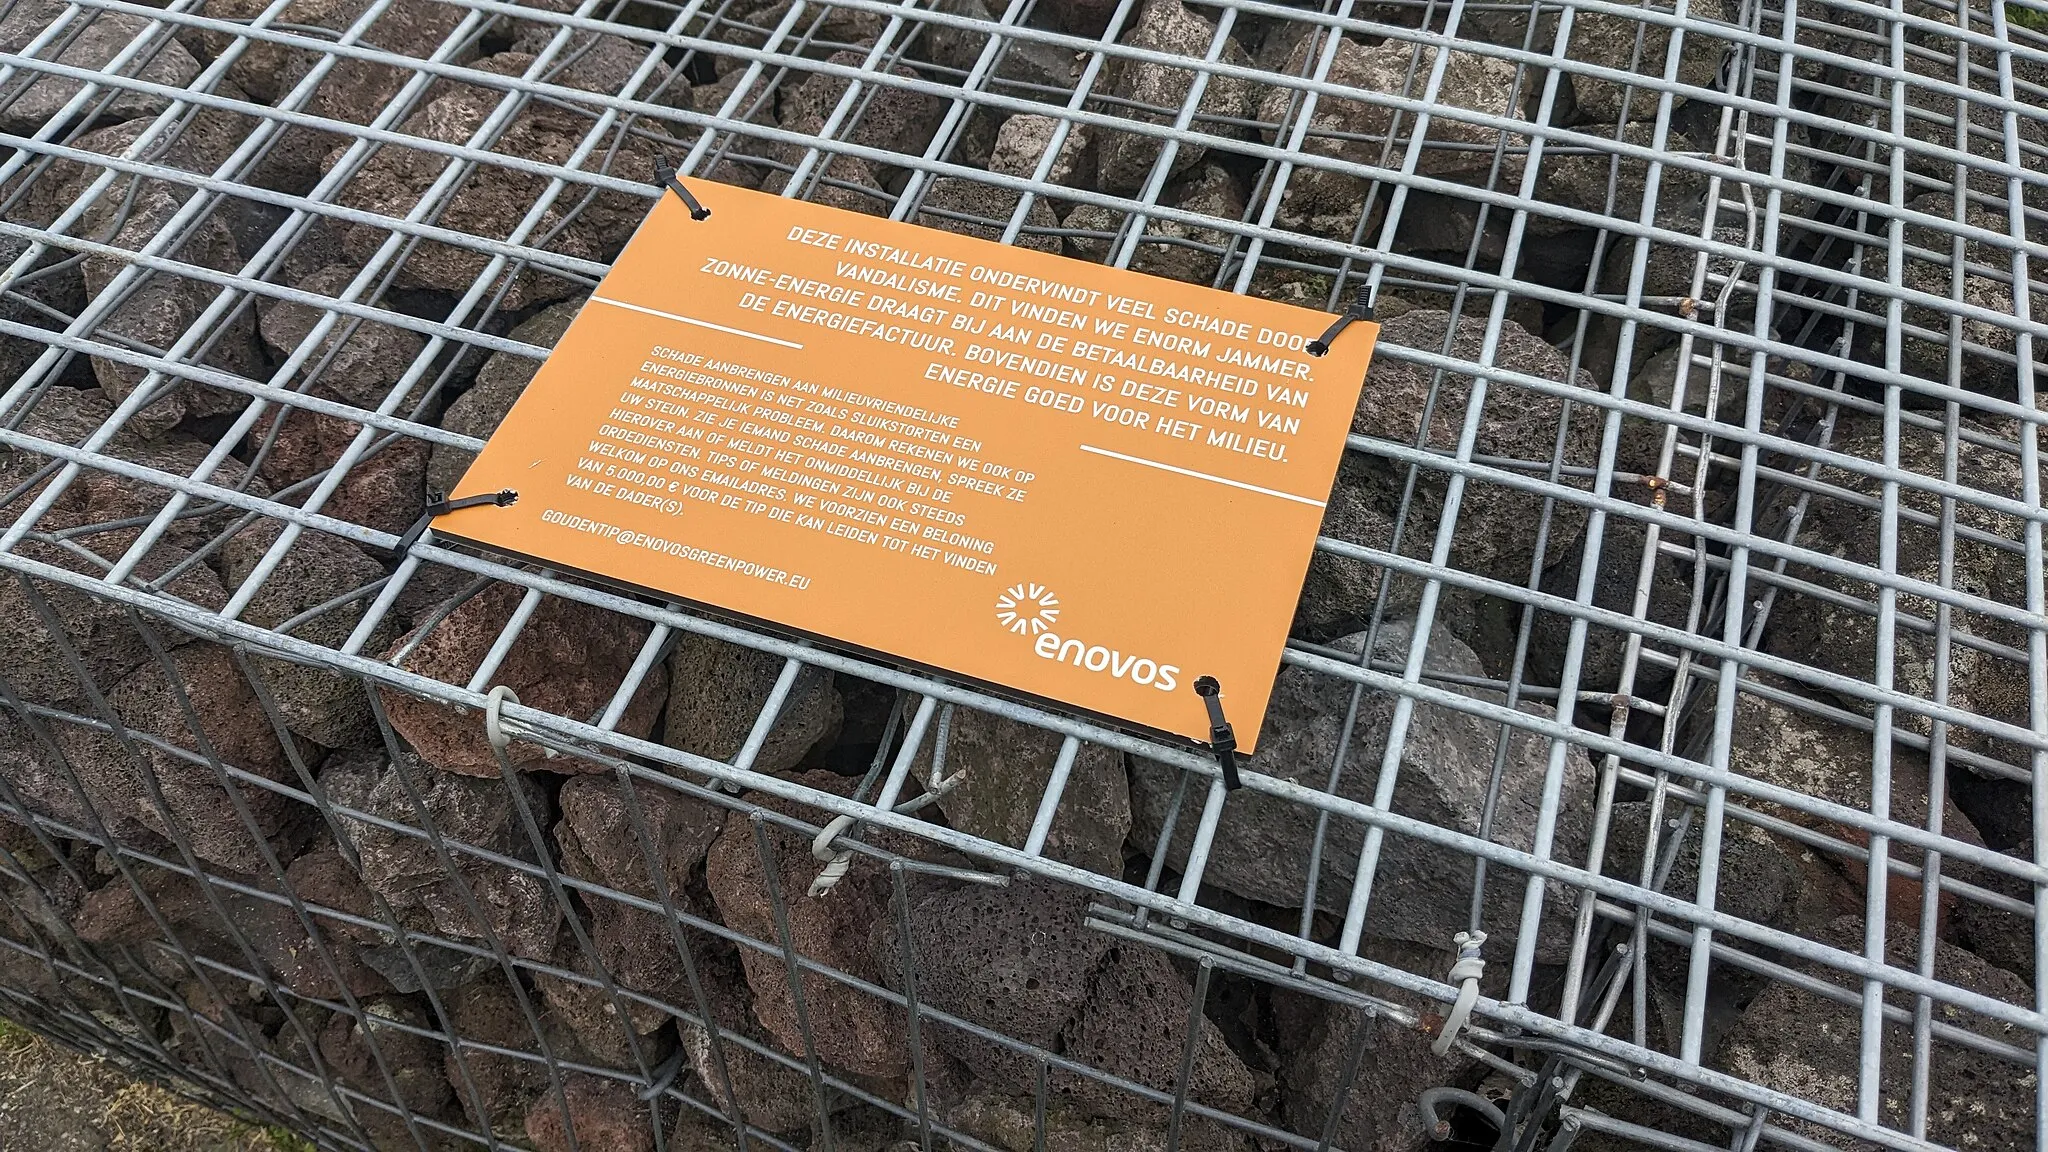 Photo showing: A local public (and permanent) anti-vandalism sign telling people that vandalism harms the solar panels operated by Enovos, that is located in the Rotterdammer neighbourhood of Terbregge, Hillegersberg-Schiebroek.